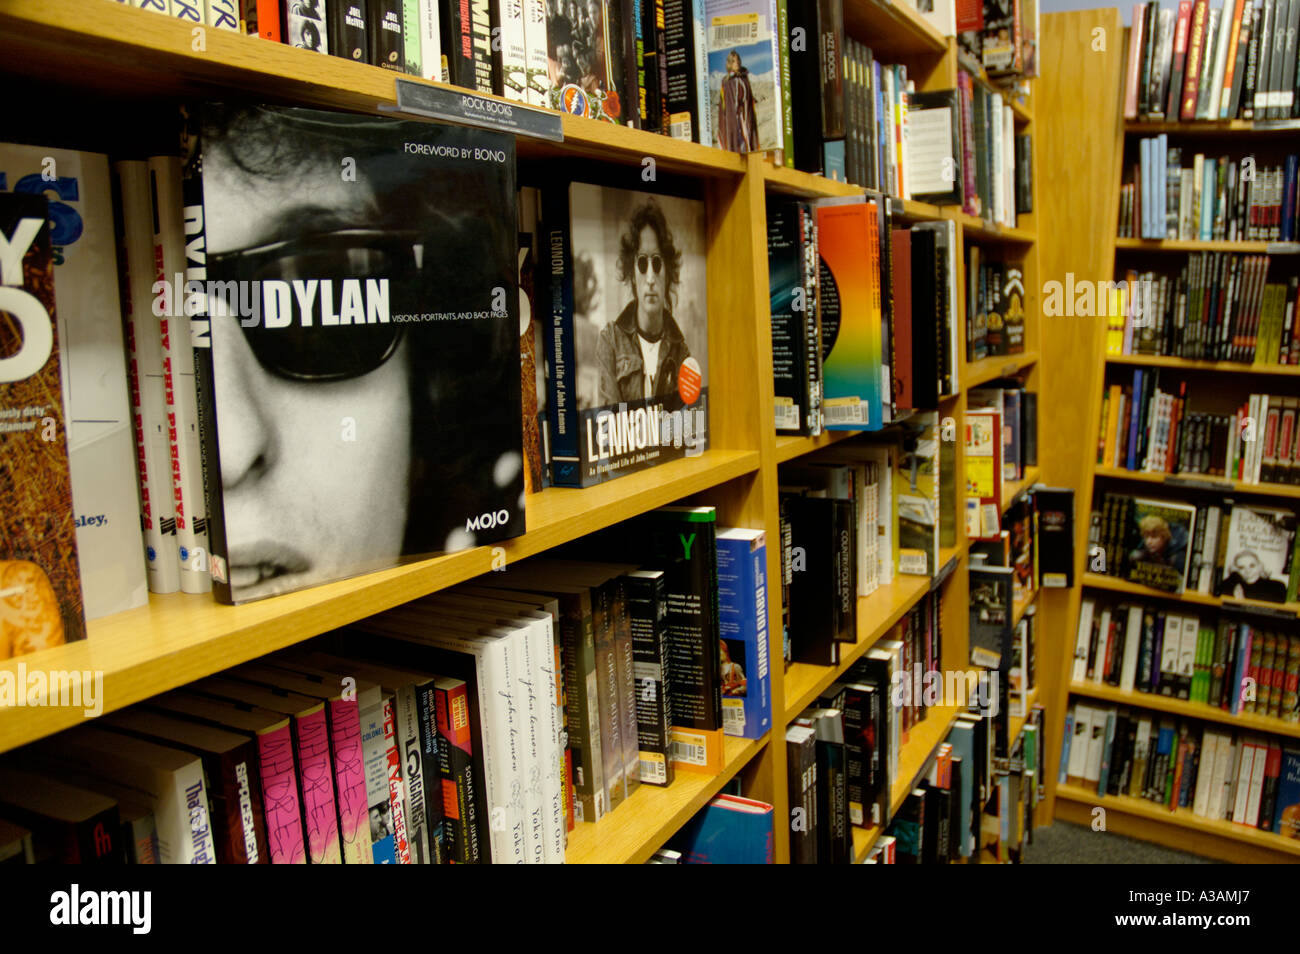 Shelves of books at a retail book store Bob Dylan cover showing Stock Photo